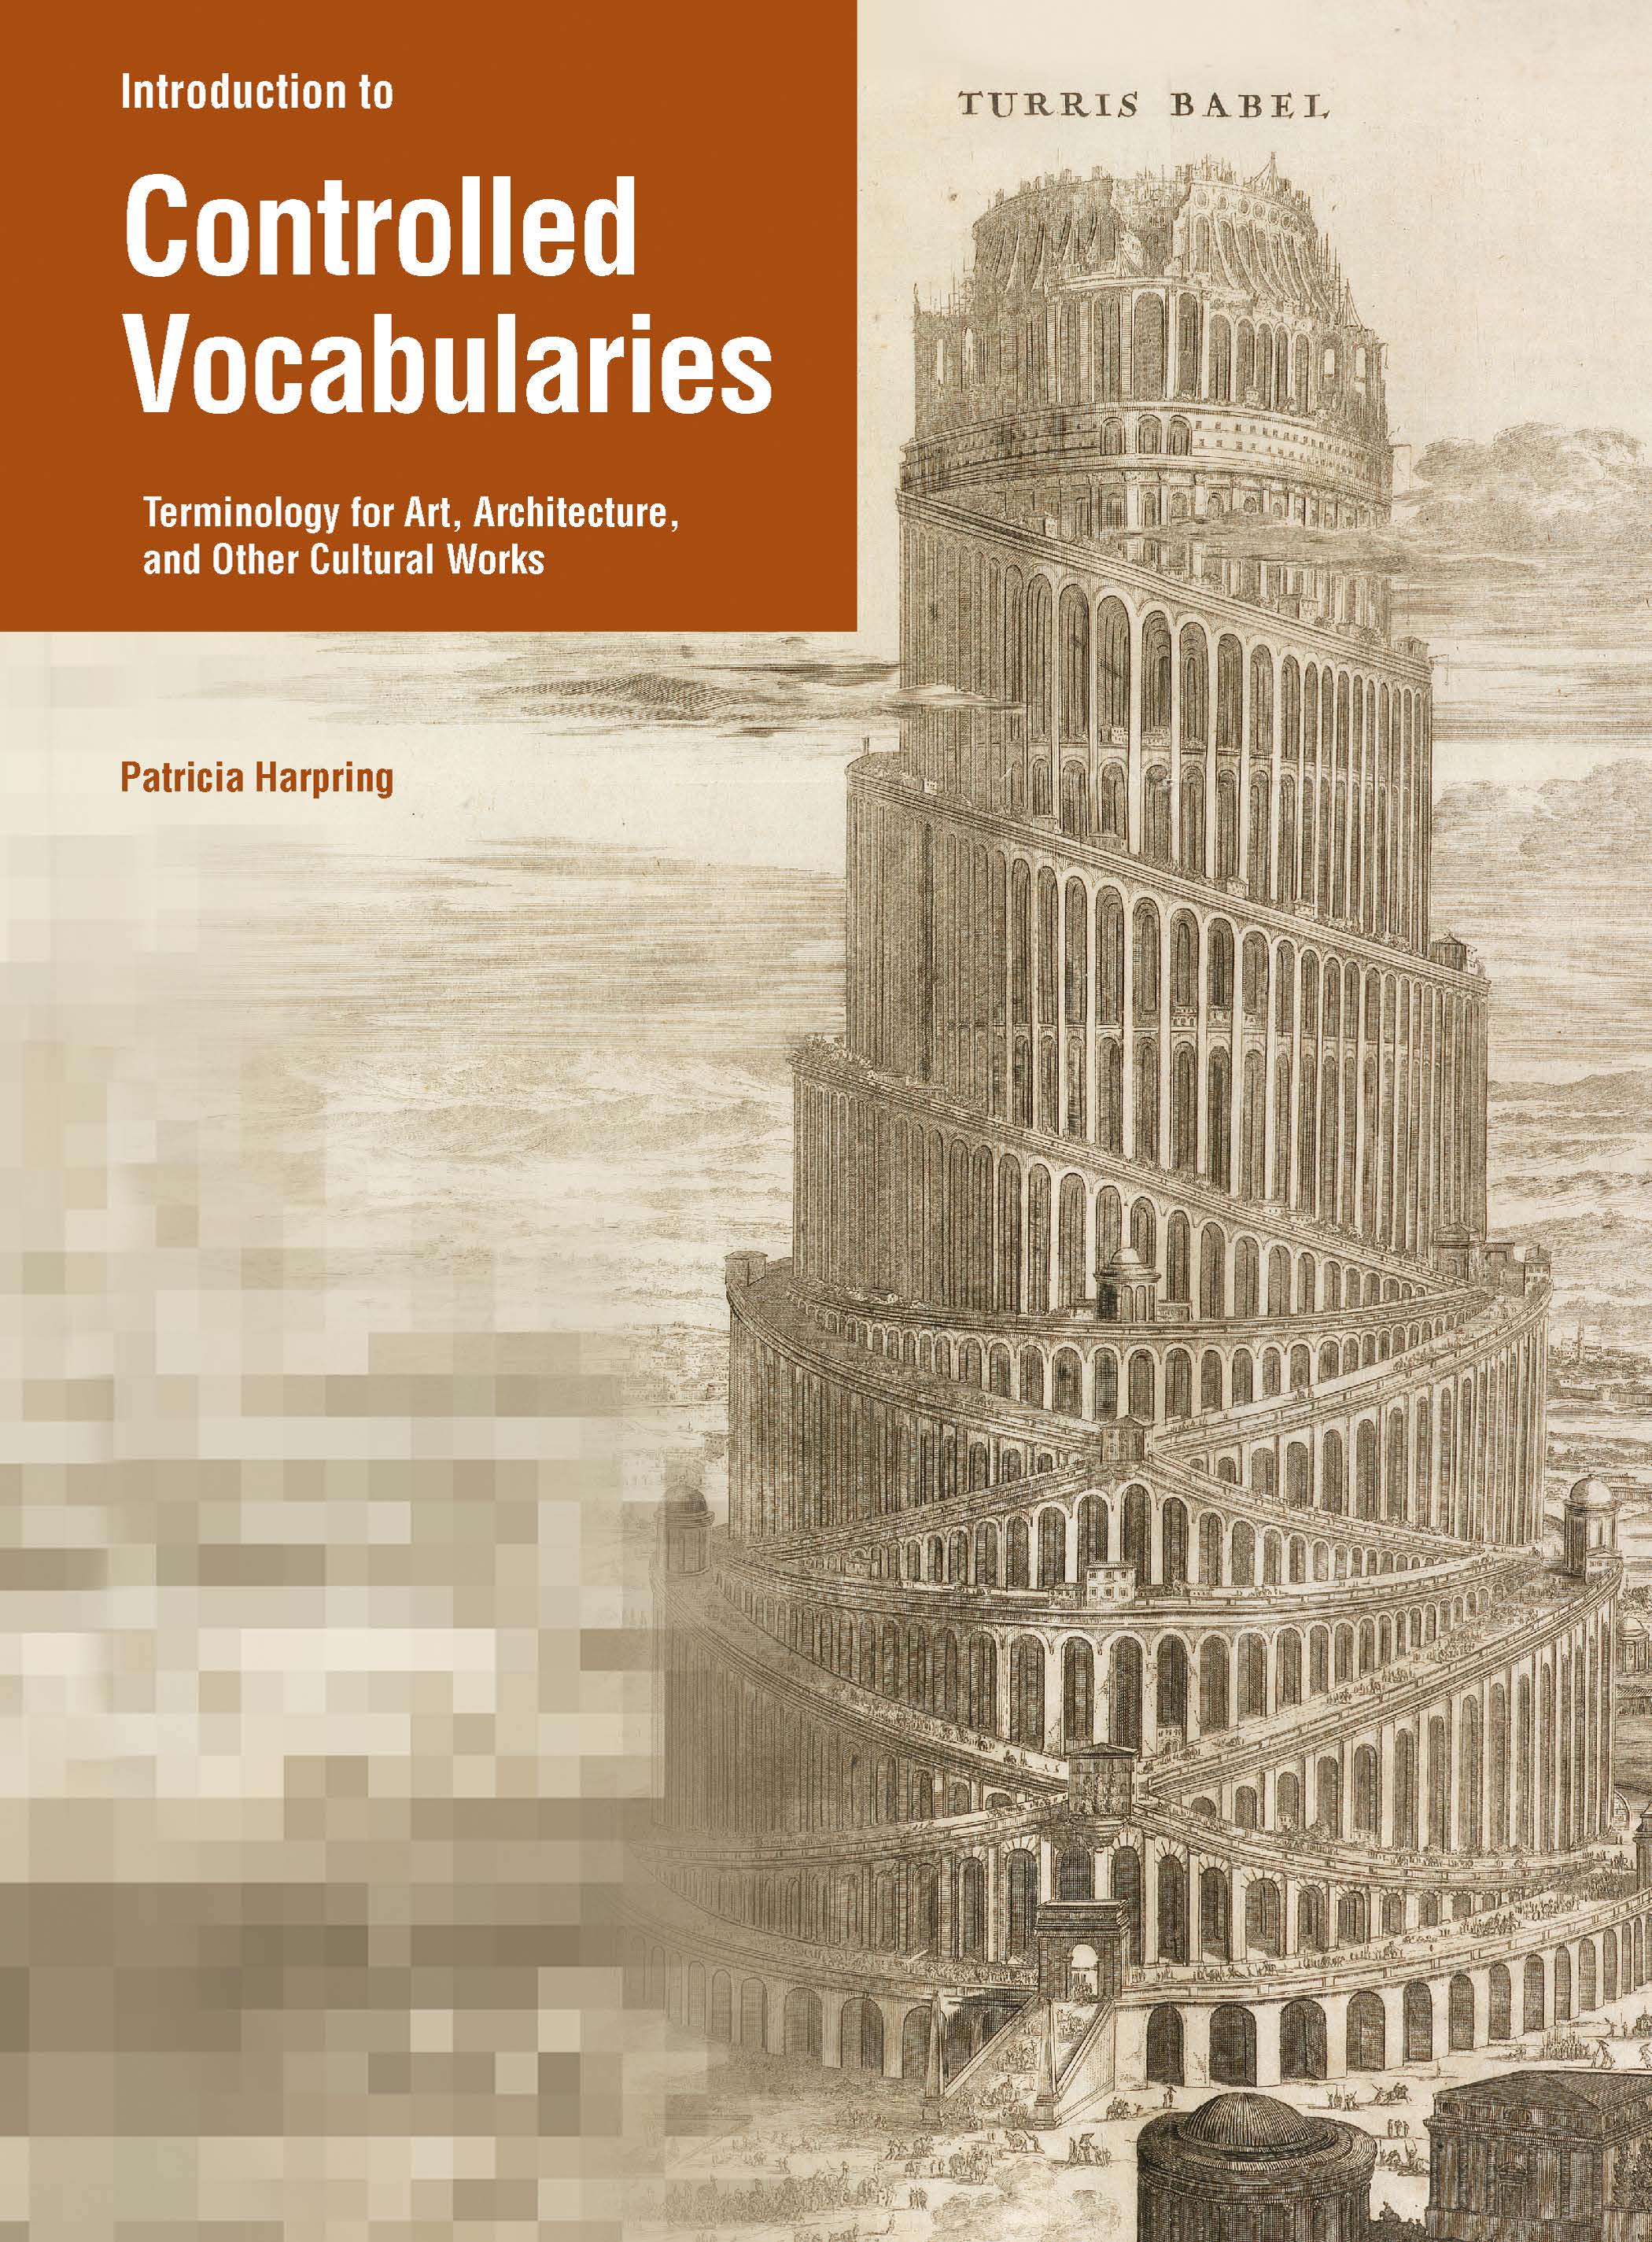 Introduction to Controlled Vocabularies: Terminologies for Art, Architecture, and Other Cultural Works Patricia Harpring, with a foreword by Murtha Baca 2010